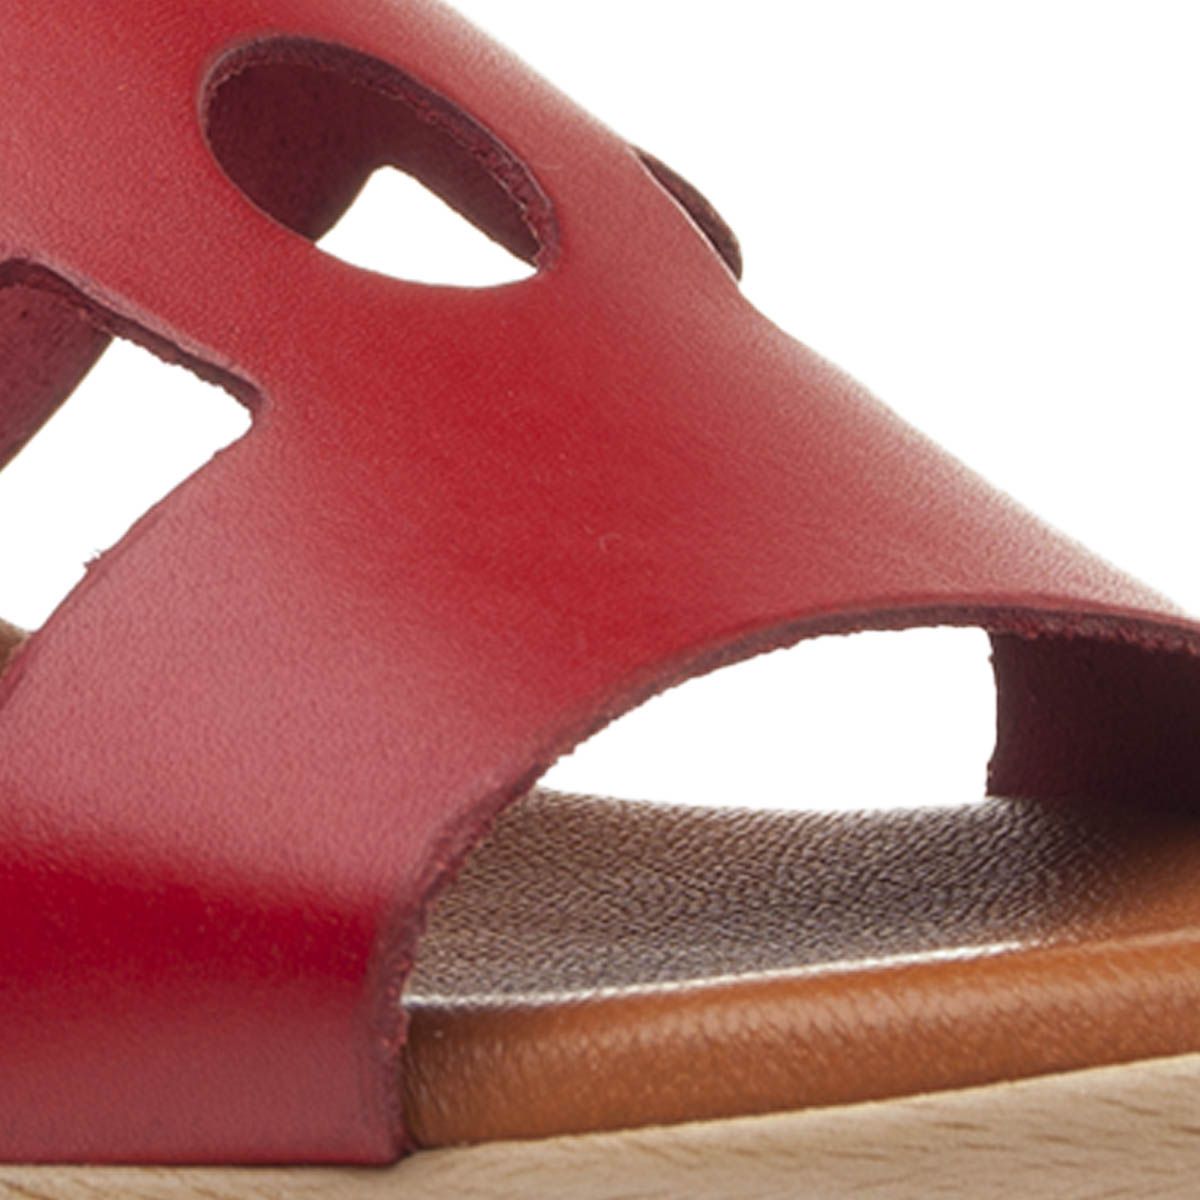 These new sandals meet everything you need to make your summer perfect. Perfect combination between quality, community and design. Manufactured 100% in leather, with padded plant also made of skin and non-slip and light polyurethane sole, nothing weigh. Its combinations of colors and textures make these sandals unique pieces very top and easy to combine. Natural, Ergonomic, Flexible, Footprint Effect, Soft, Absorbent, Breathable, Shock Absorbing, Lightweight and Anti-slip..Description Technical: External MaterialNatural LeatherMaterial Interior: Natural Leather.Material Plant: Natural Leather.Material Sole: Polyurethane. .Atura Platform: 3.Alture Tacon: 0.Ture Bag0.Proofundity Bag